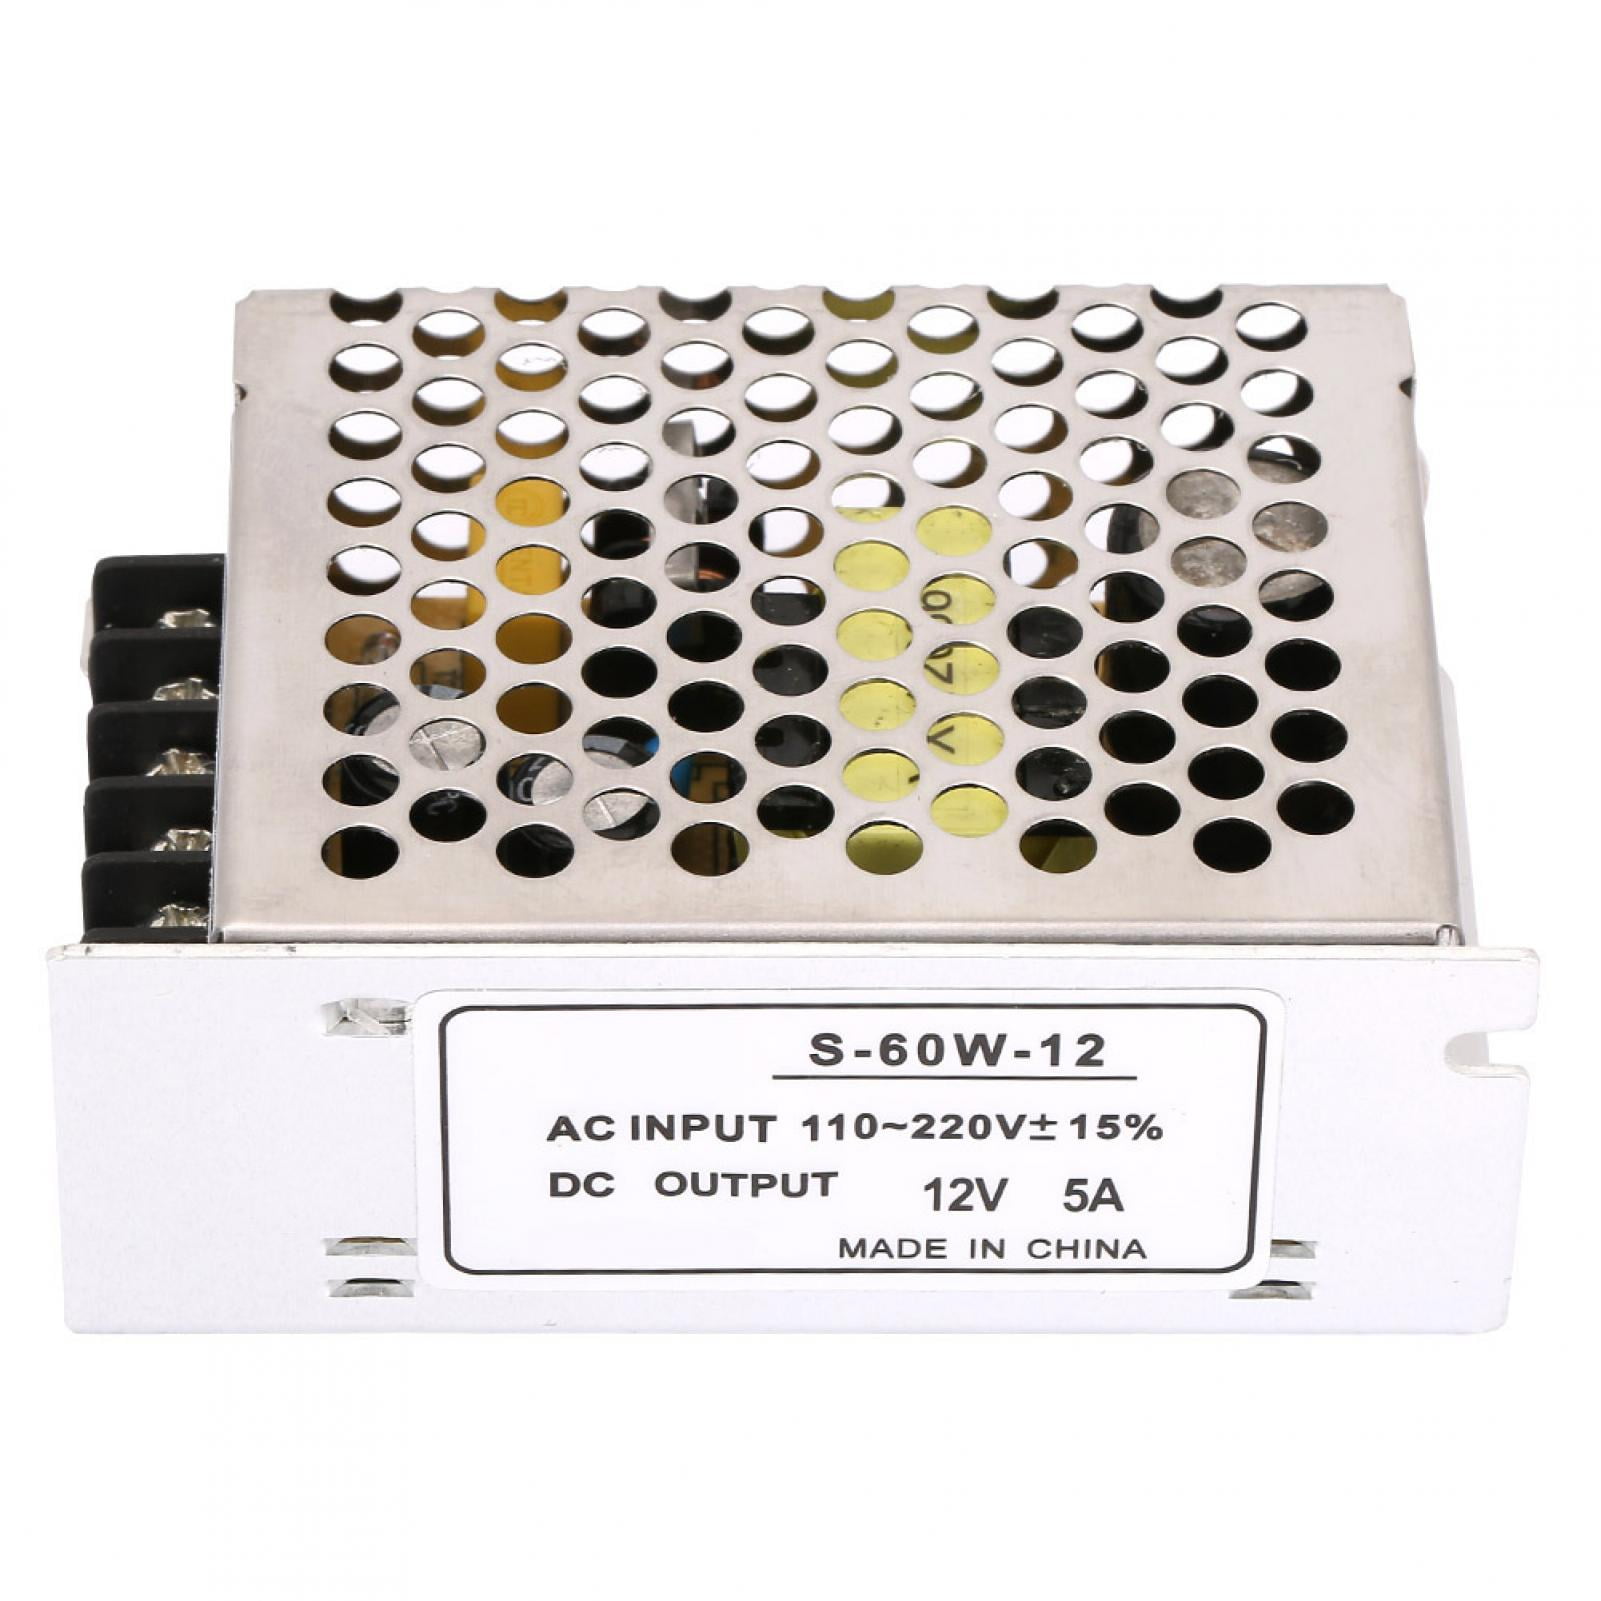 Details about   AC 110/220V To DC 12V 5A 60W Volt Transformer Switch Power Supply Converter 